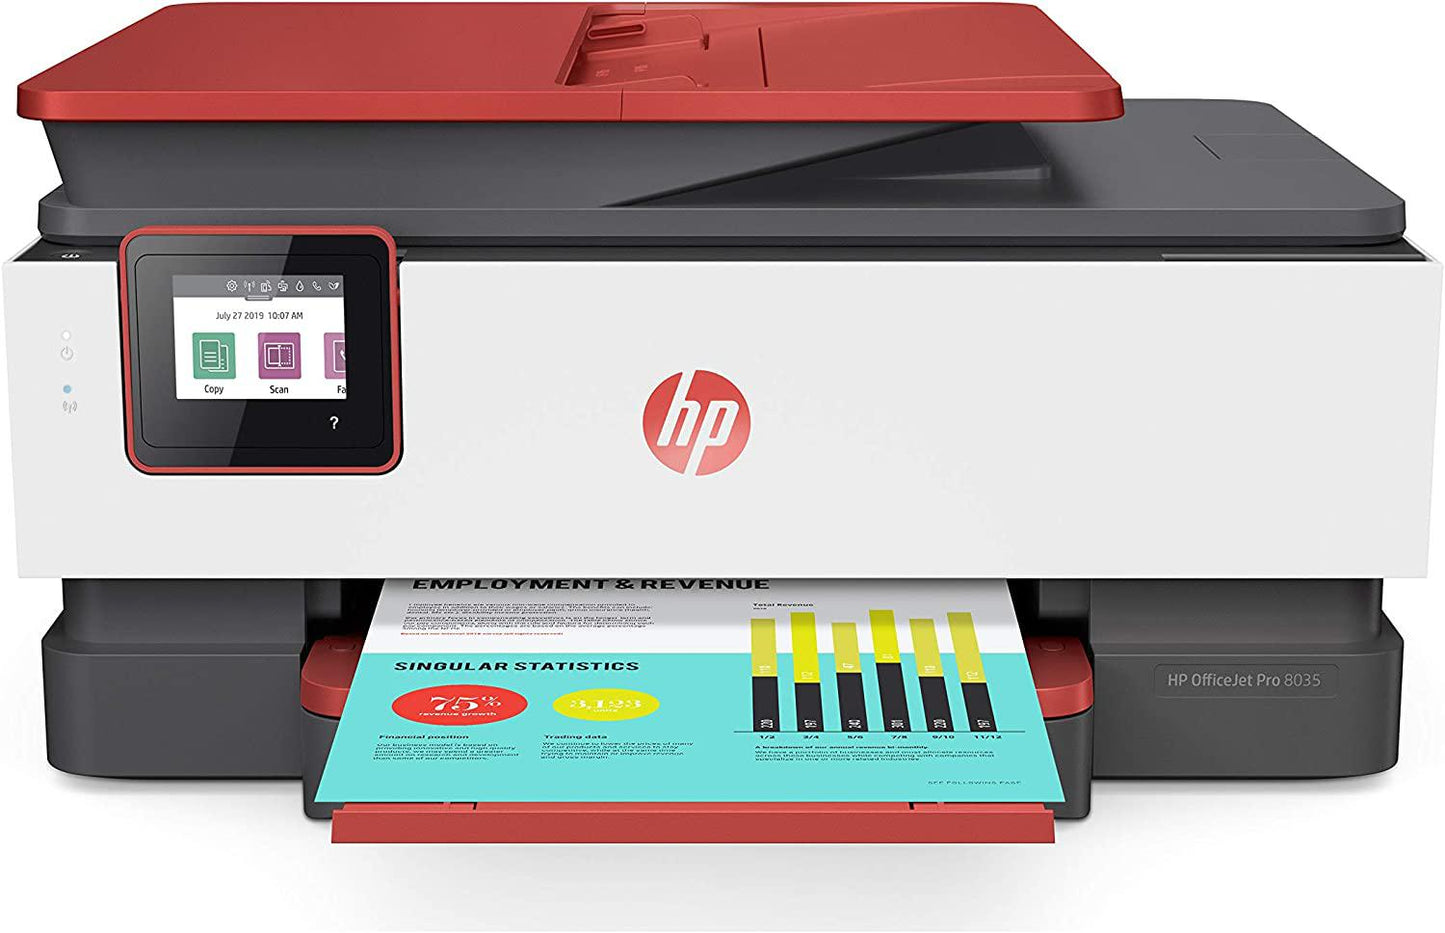 Hp Officejet Pro 8035 All-In-One Wireless Printer - Includes 8 Months Of Ink